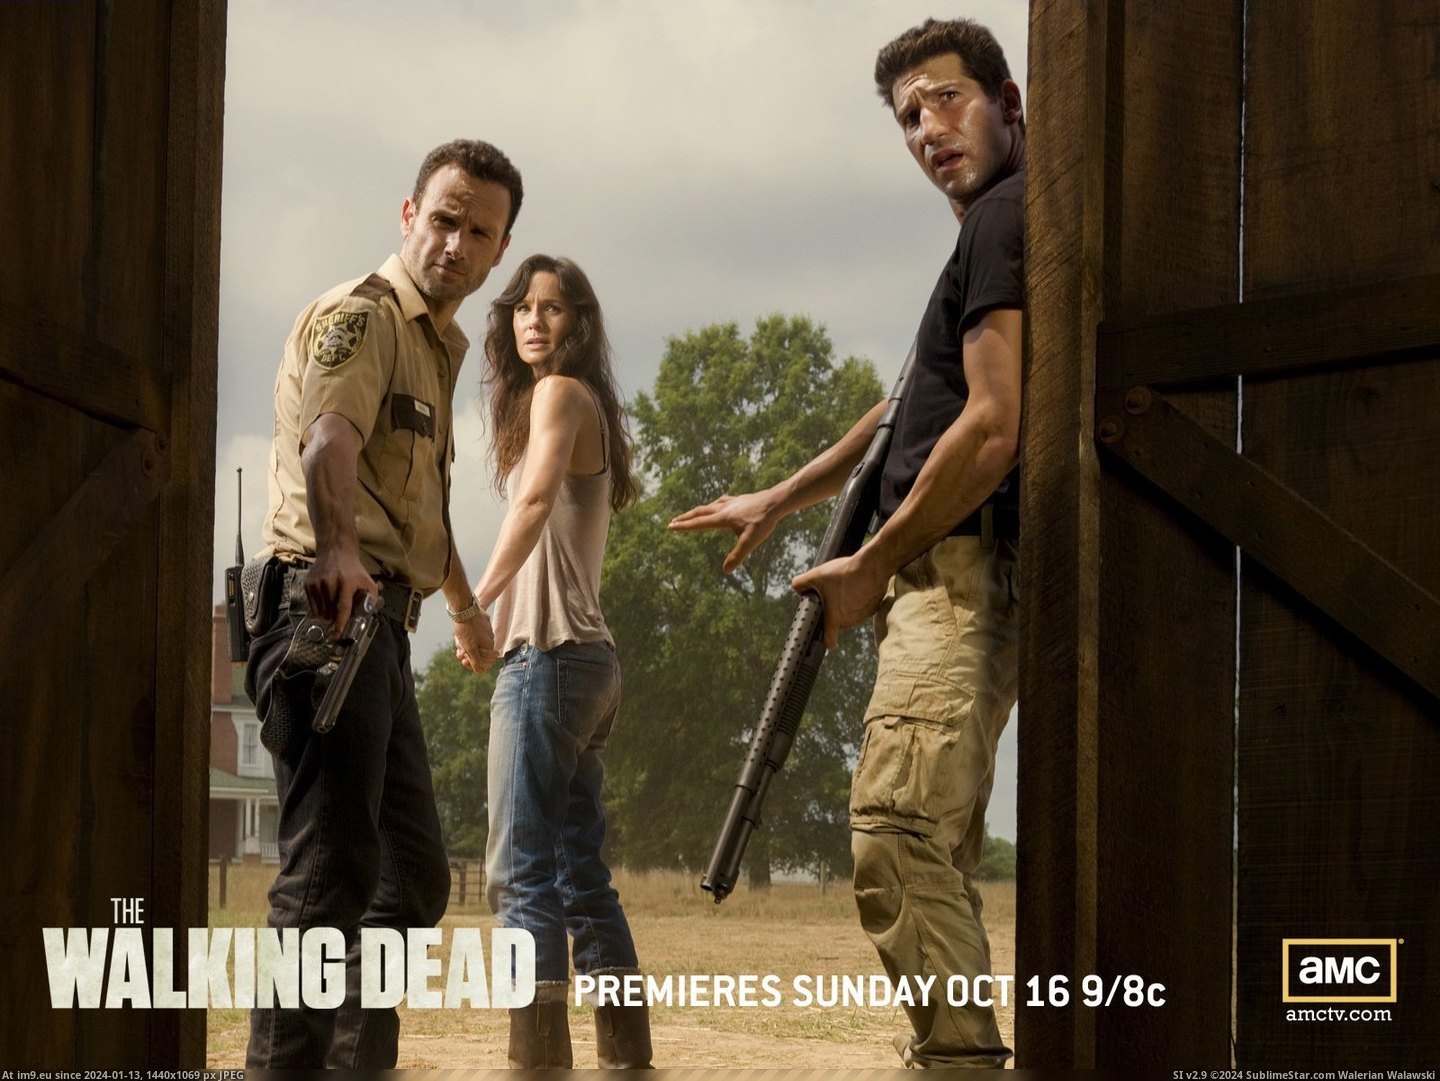 Tv Show The Walking Dead 284477 (in TV Shows HD Wallpapers)